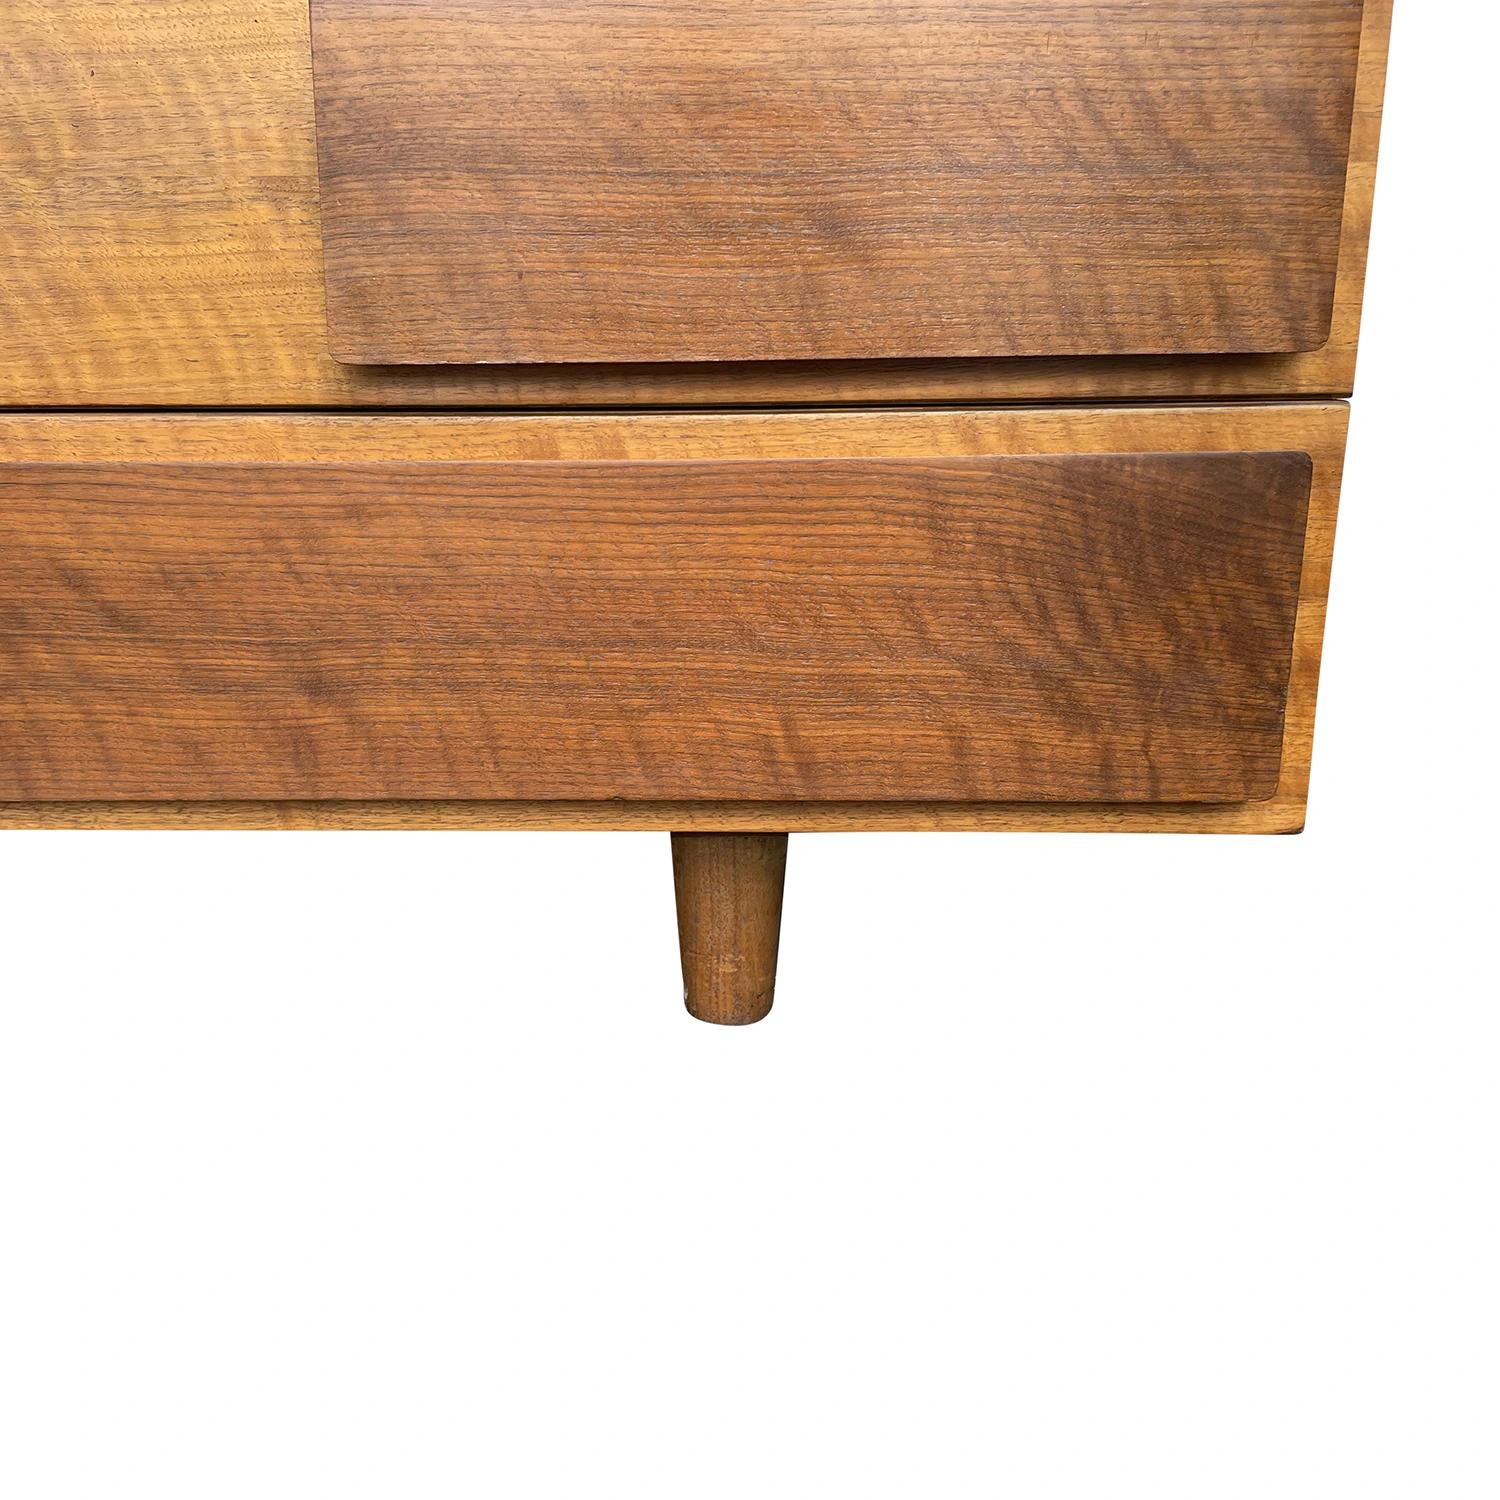 20th Century Brown Italian Walnut M. Singer & Sons Dresser, Cabinet by Gio Ponti For Sale 12